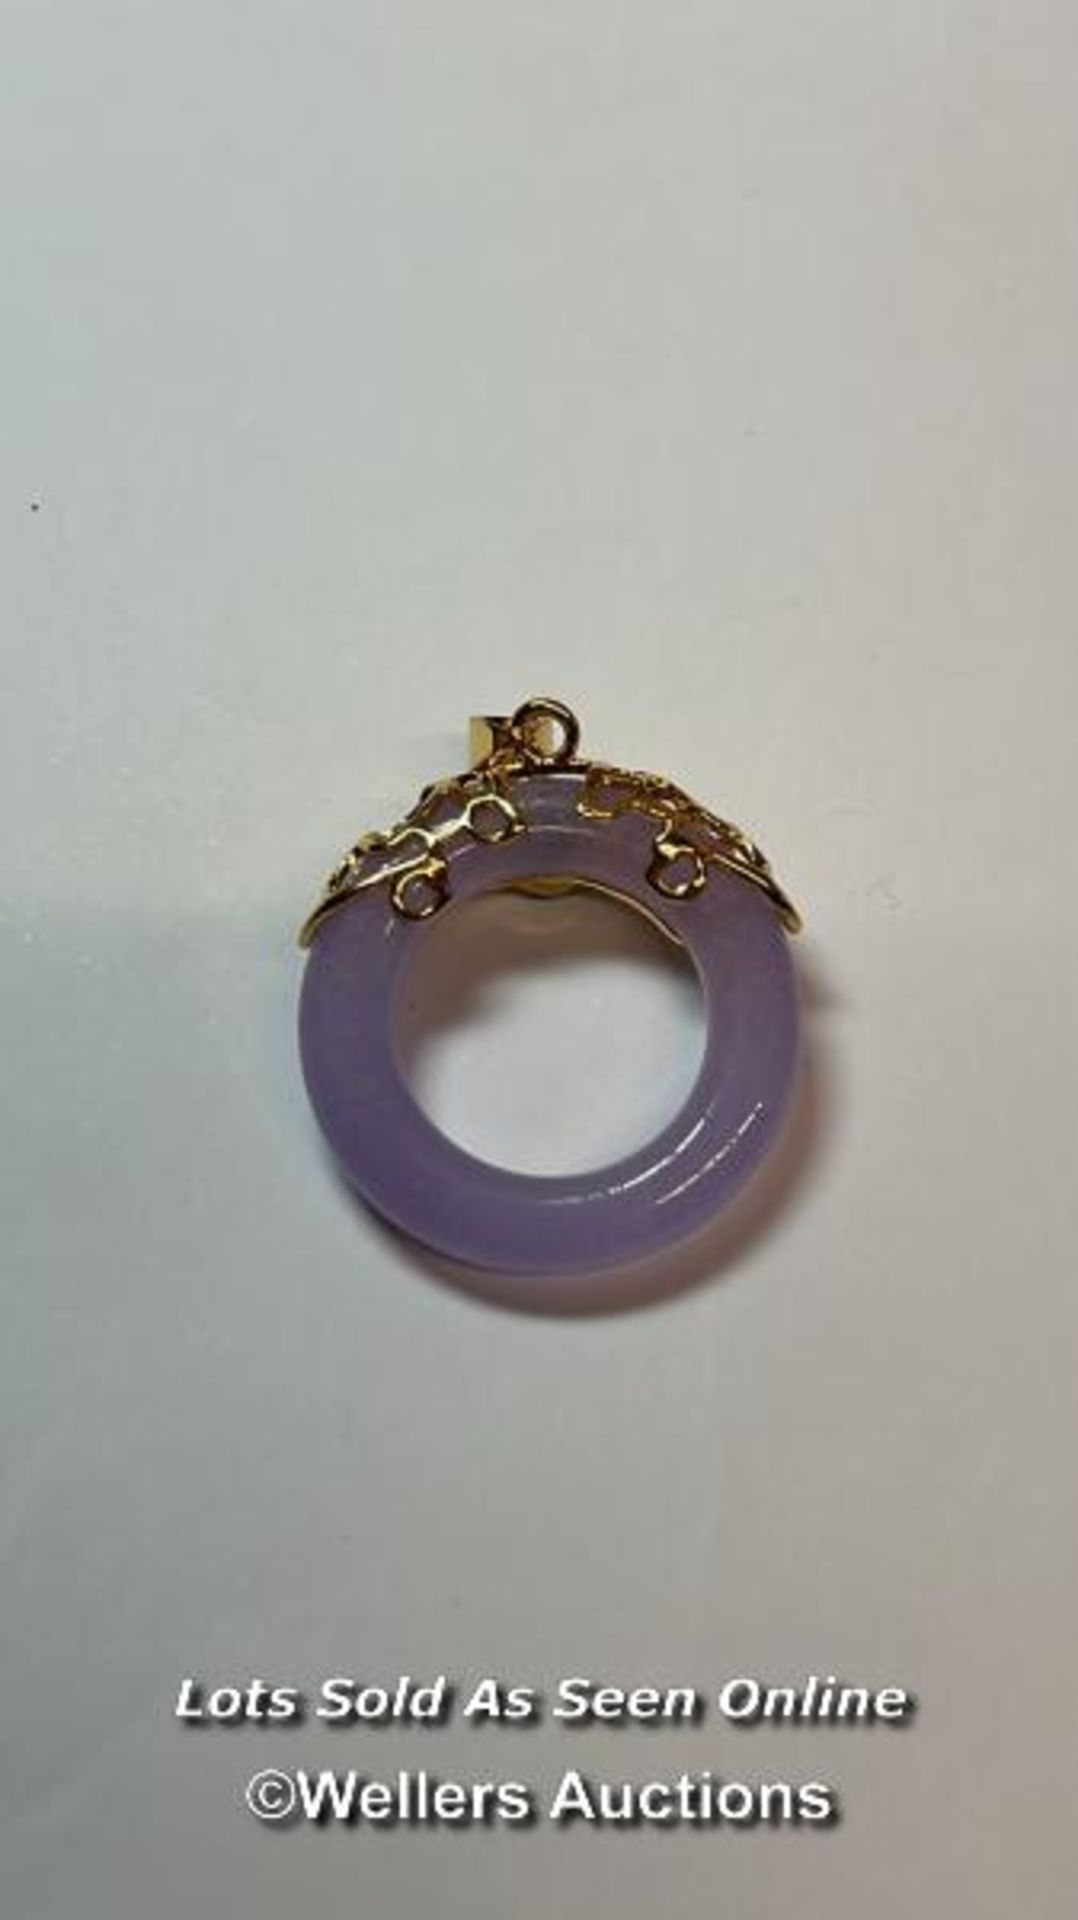 Lavander jade and green pendant with gold plated fittings. Length 4cm. / SF - Bild 2 aus 2